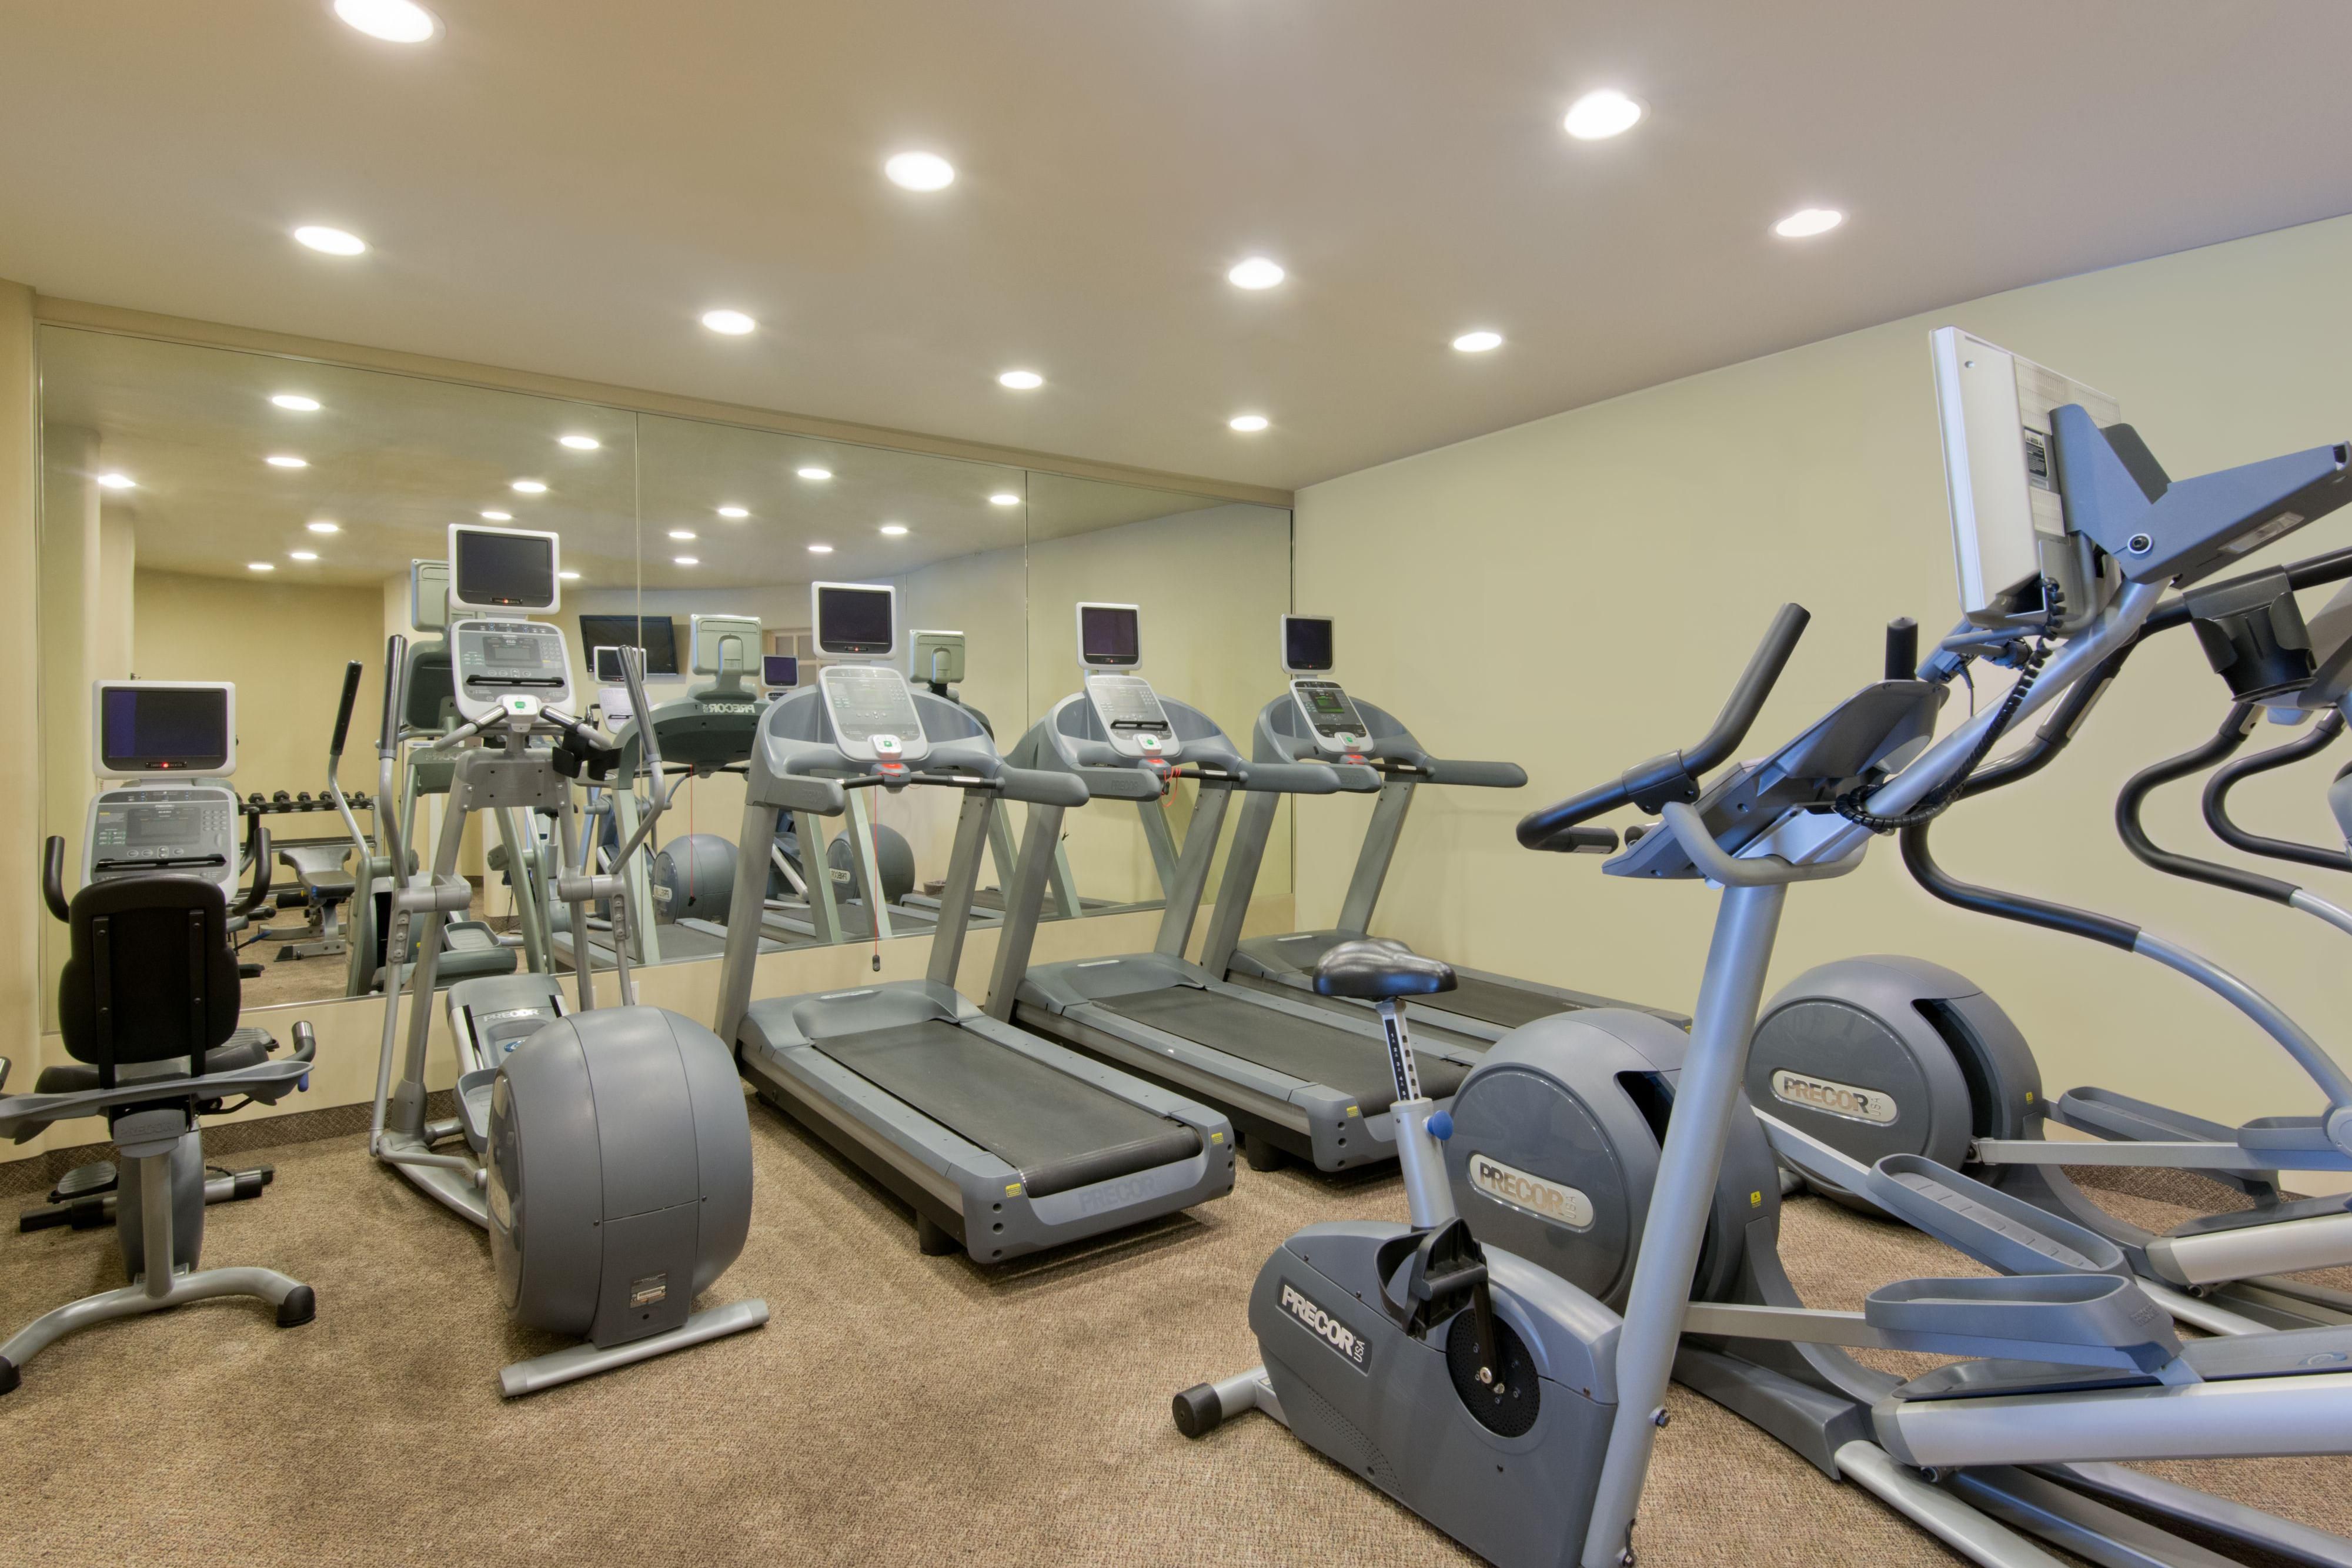 Work out in the well-equipped Fitness Center